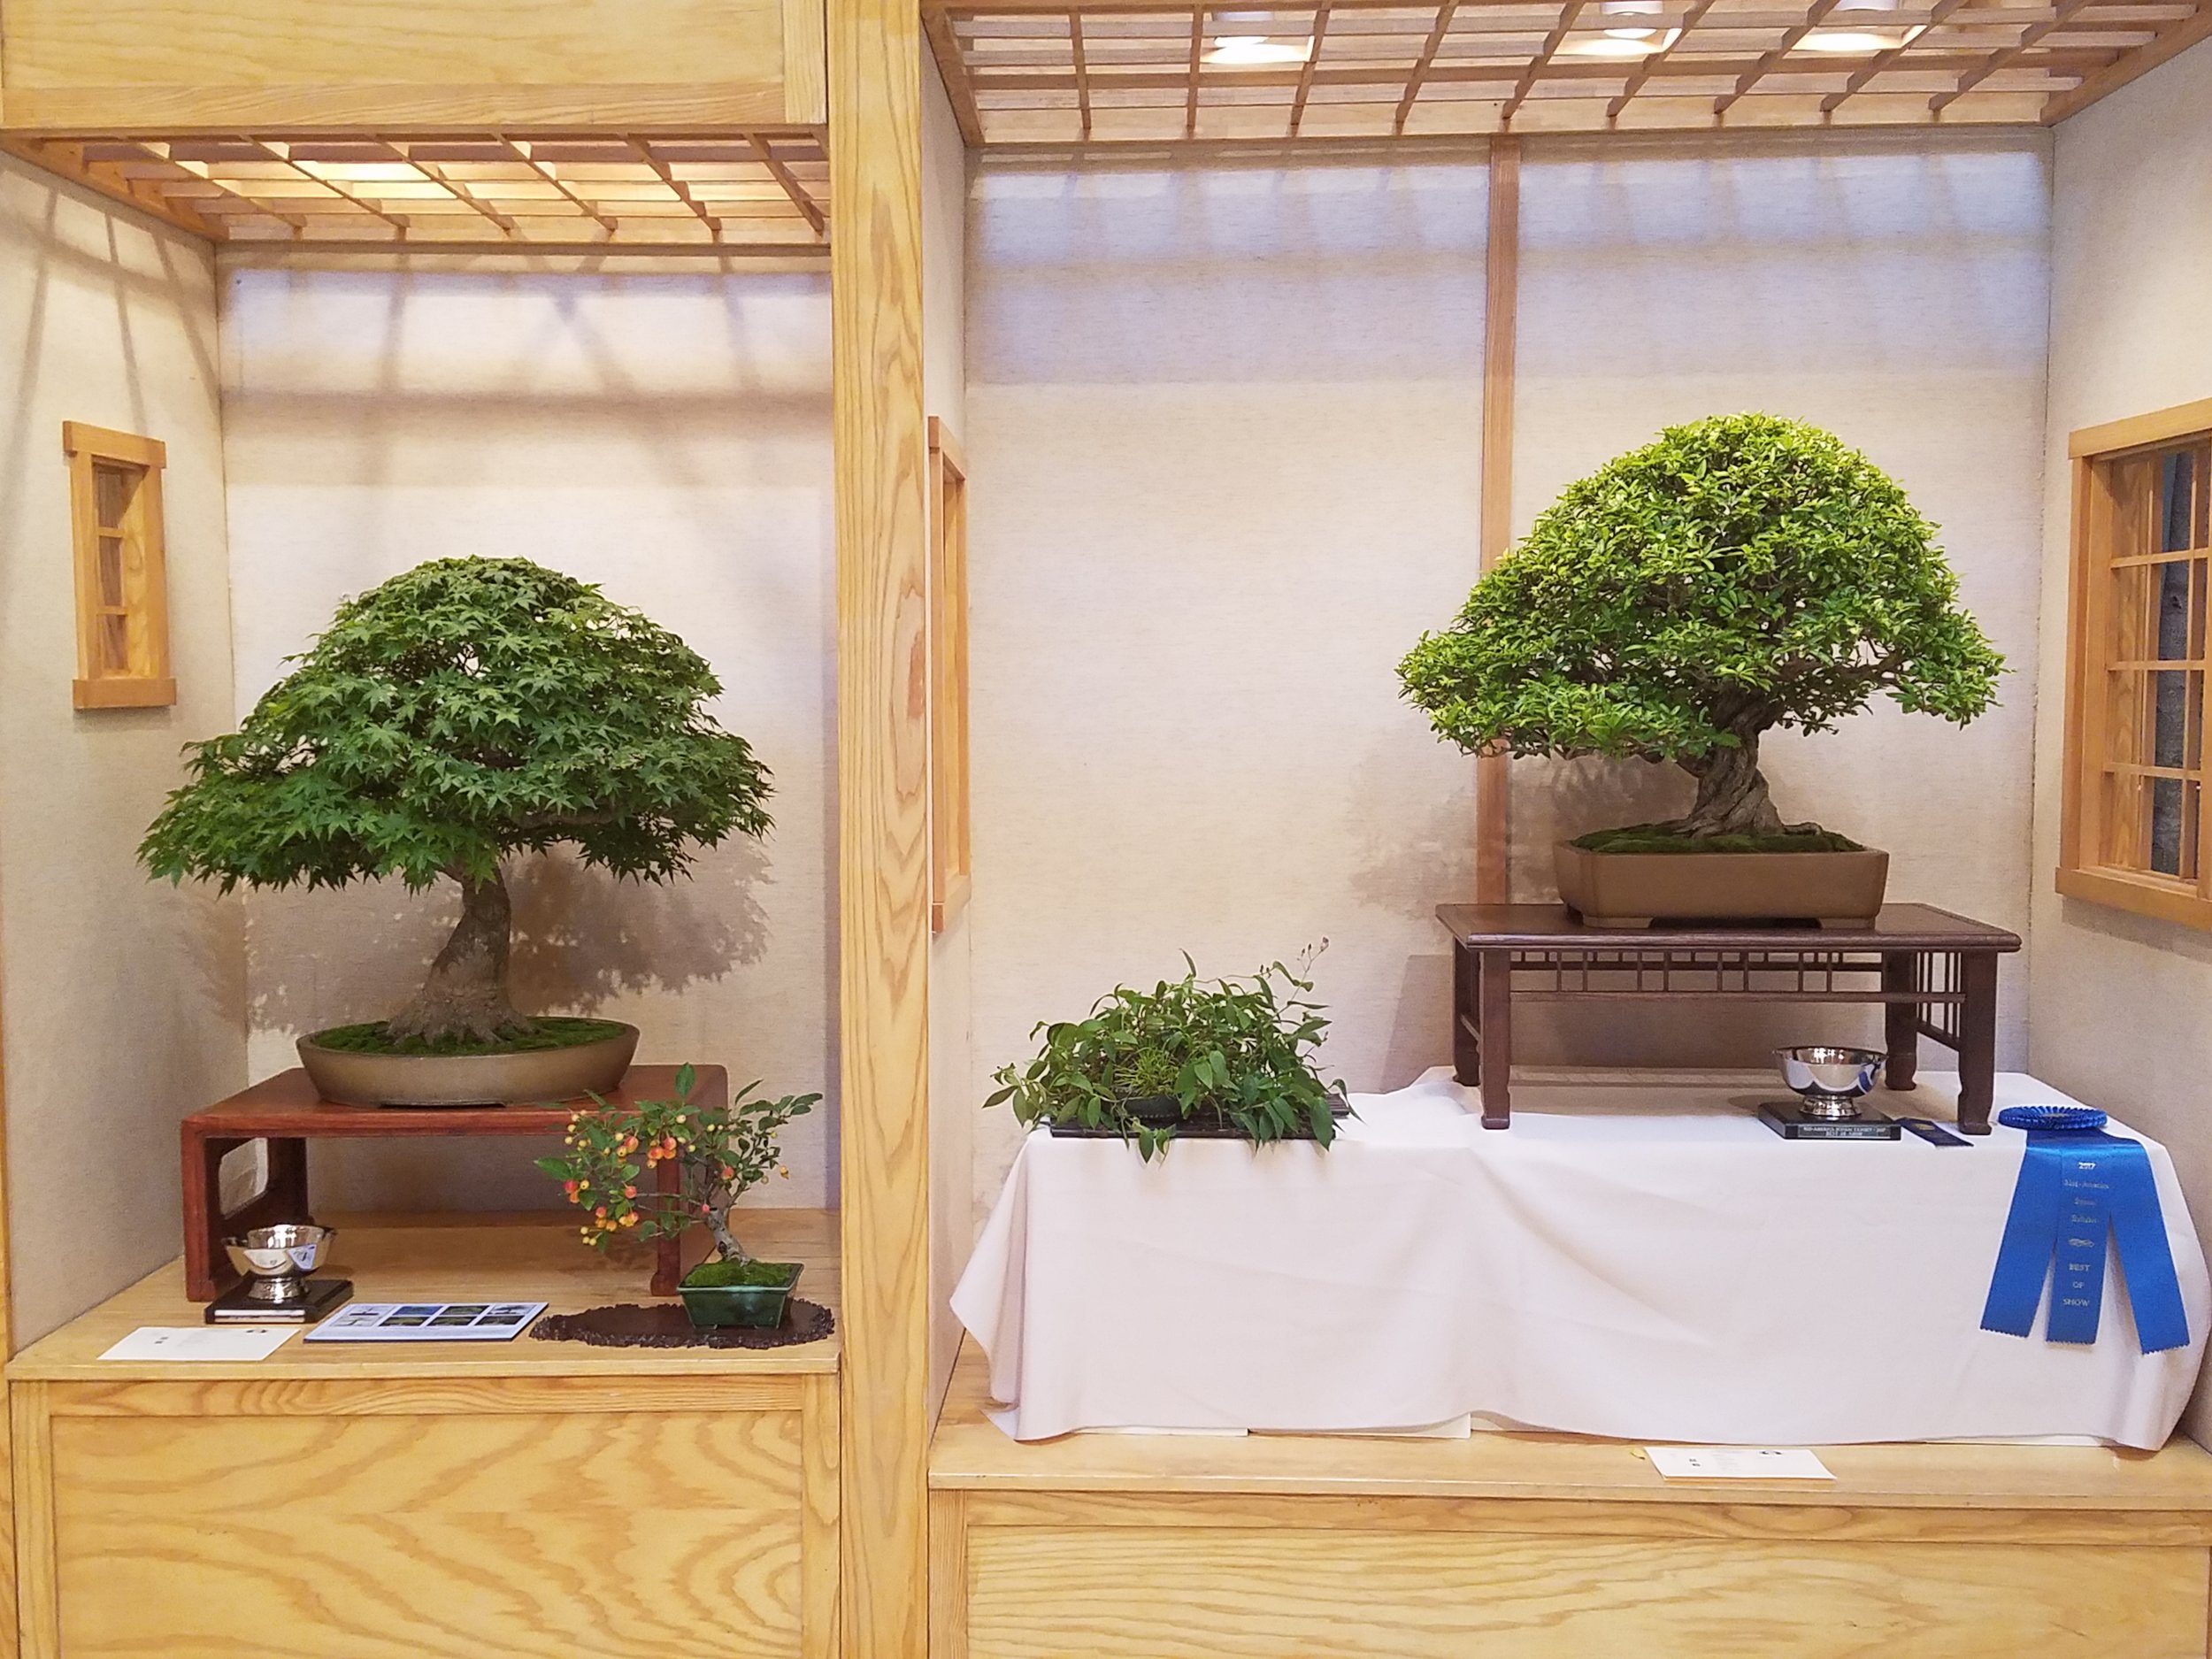 2017 Mid-America Bonsai Exhibition - First Place Professional and Best of Show Trees in Tokonoma